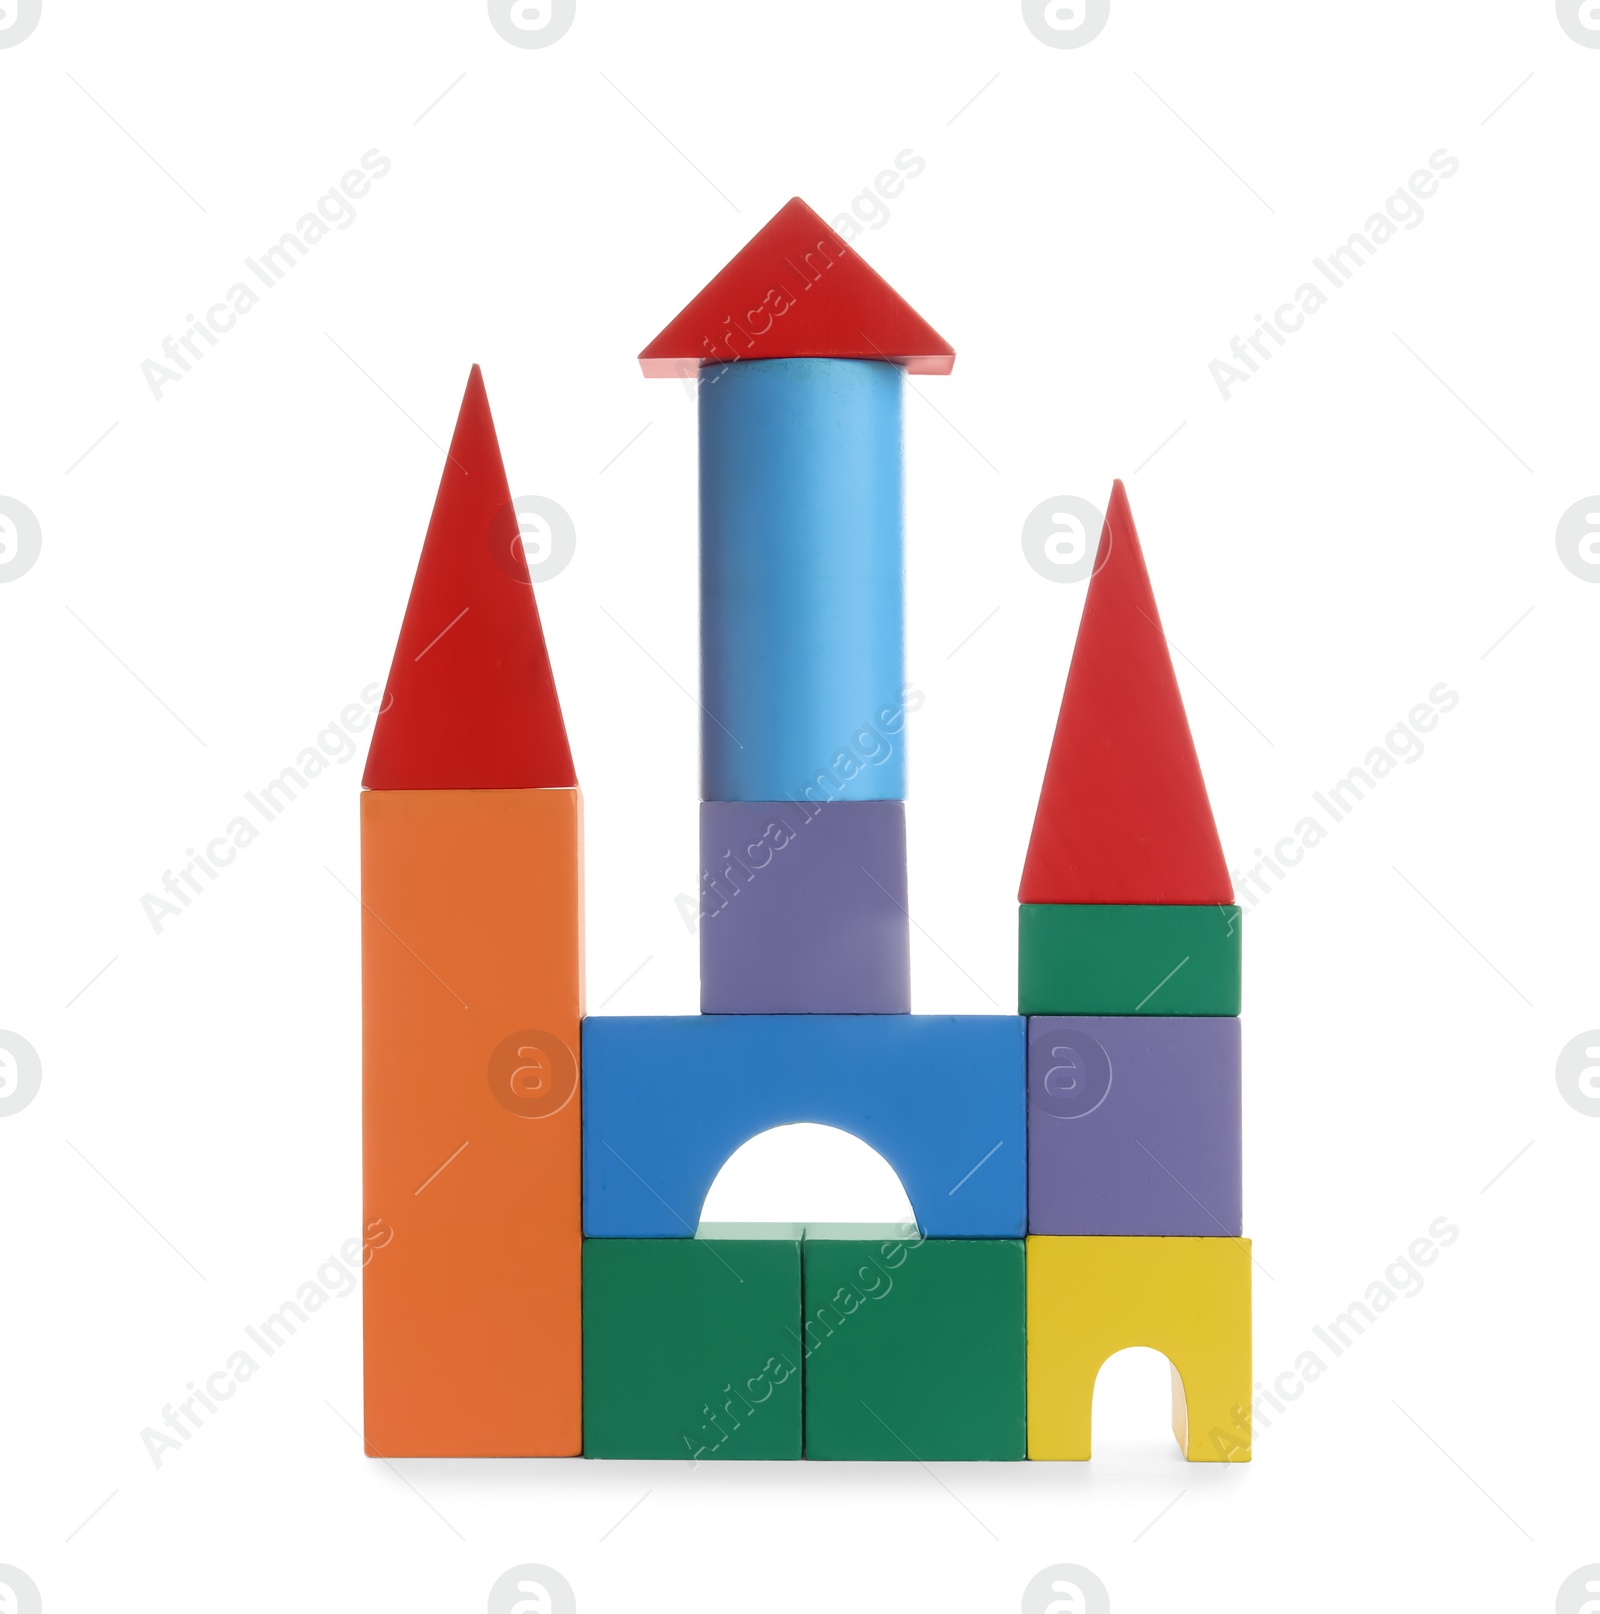 Photo of Colorful toy castle made of blocks isolated on white